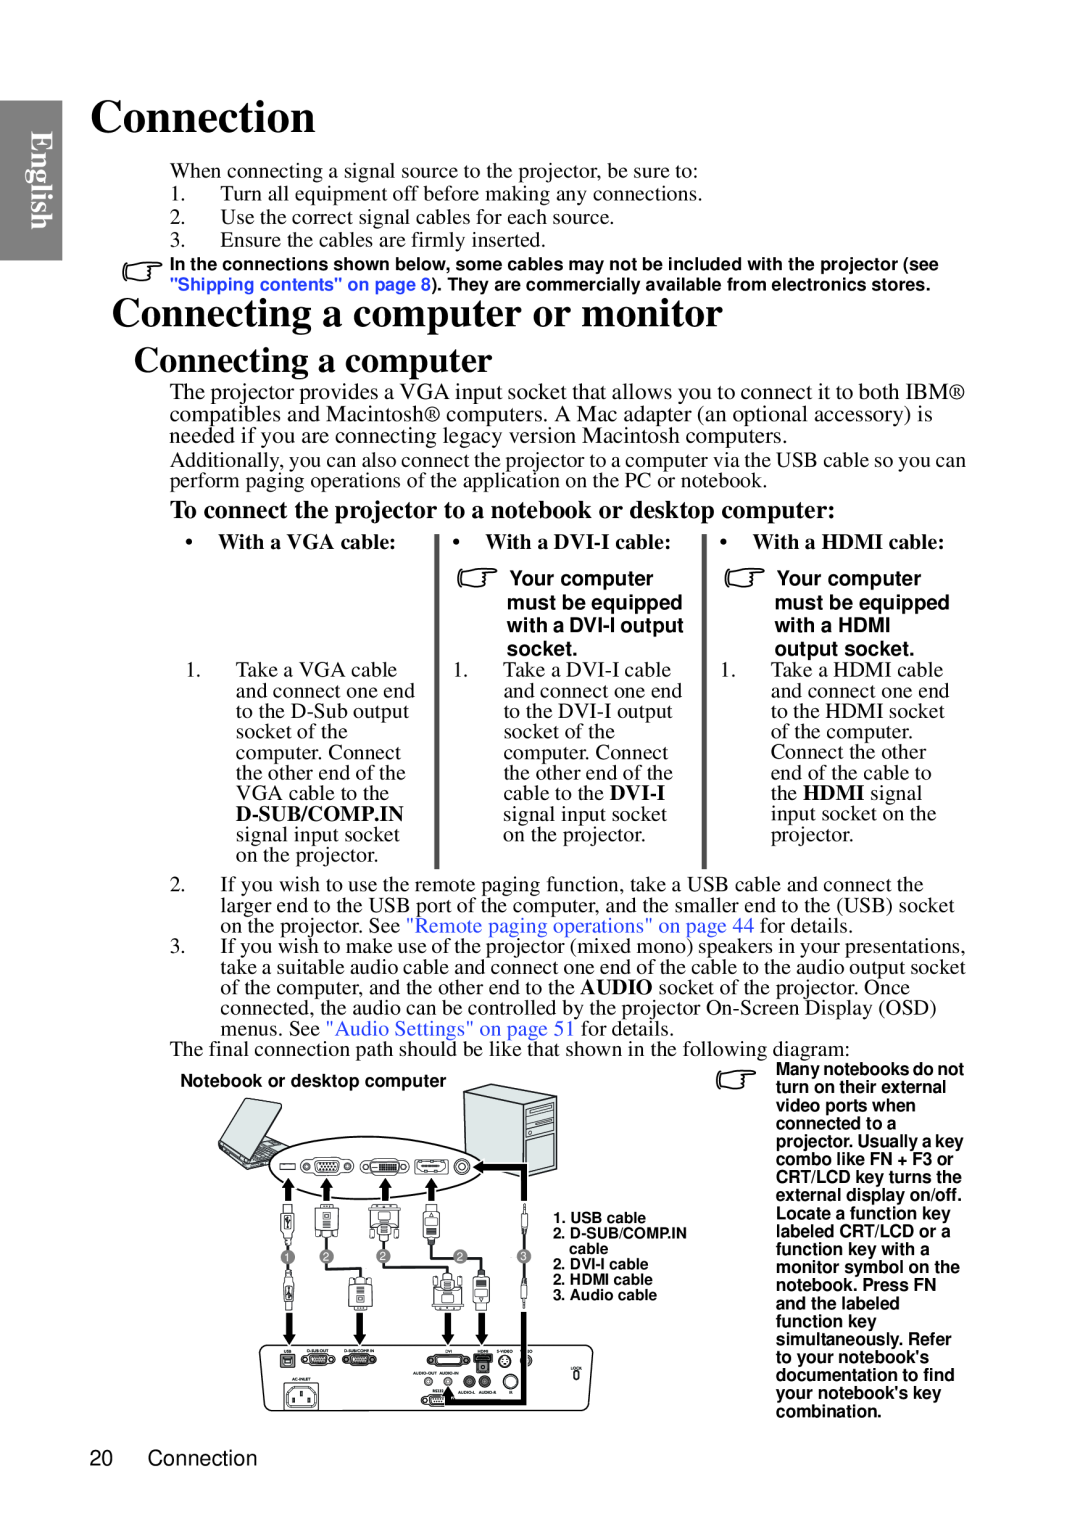 BenQ MP735, MP727 Connection, Connecting a computer or monitor, To connect the projector to a notebook or desktop computer 